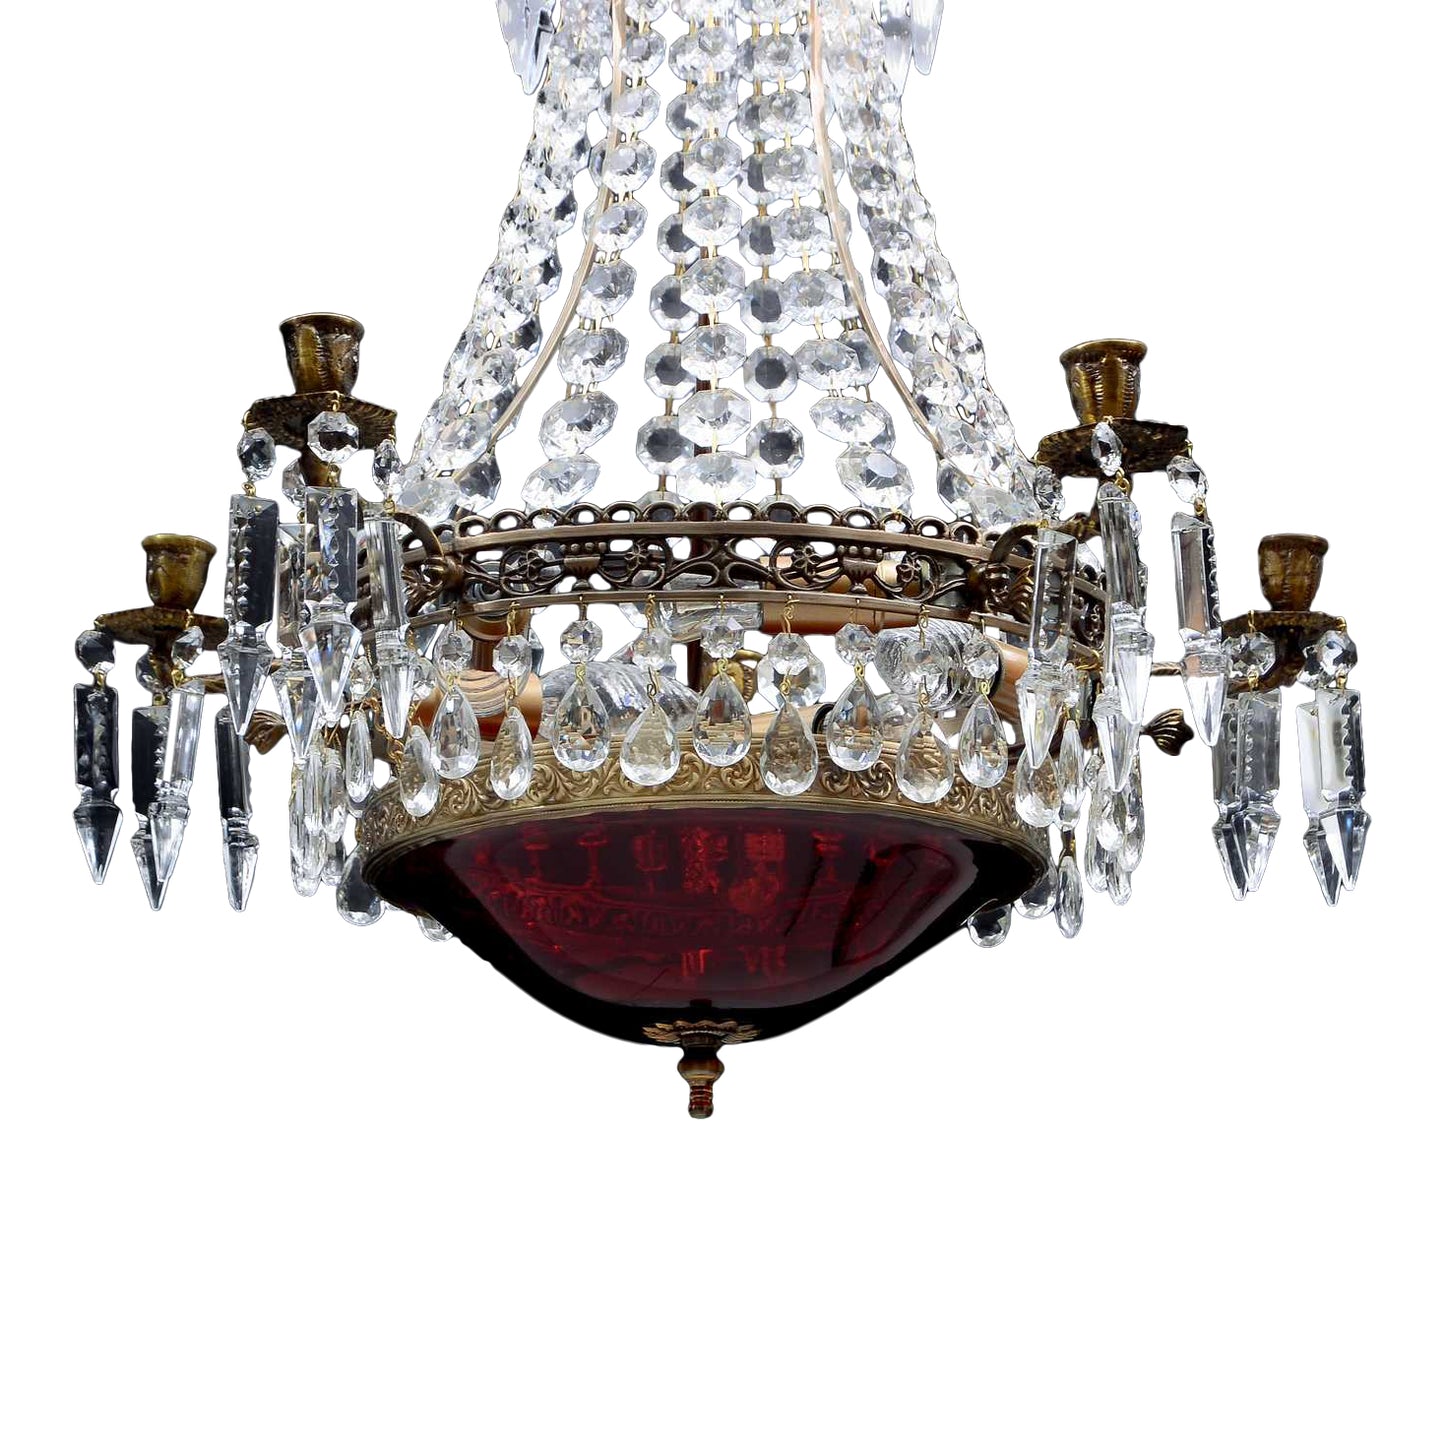 Empire chandelier 1900's with rare red glass bowl